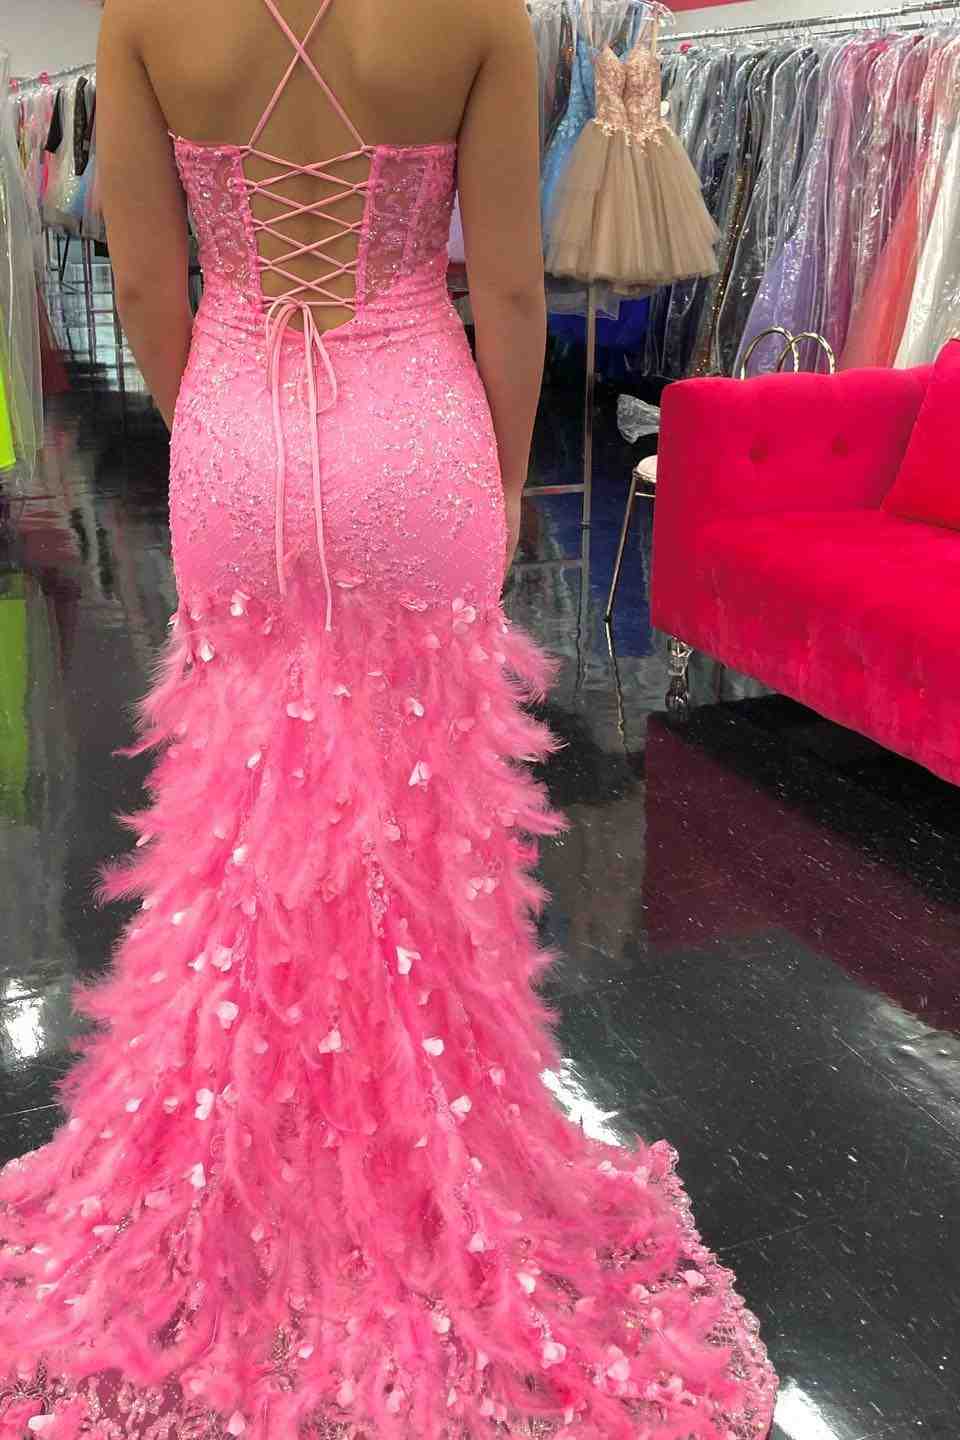 Hot Pink Mermaid V Neck Lace Tulle Lace-Up Back Long Prom Dress with Feathers